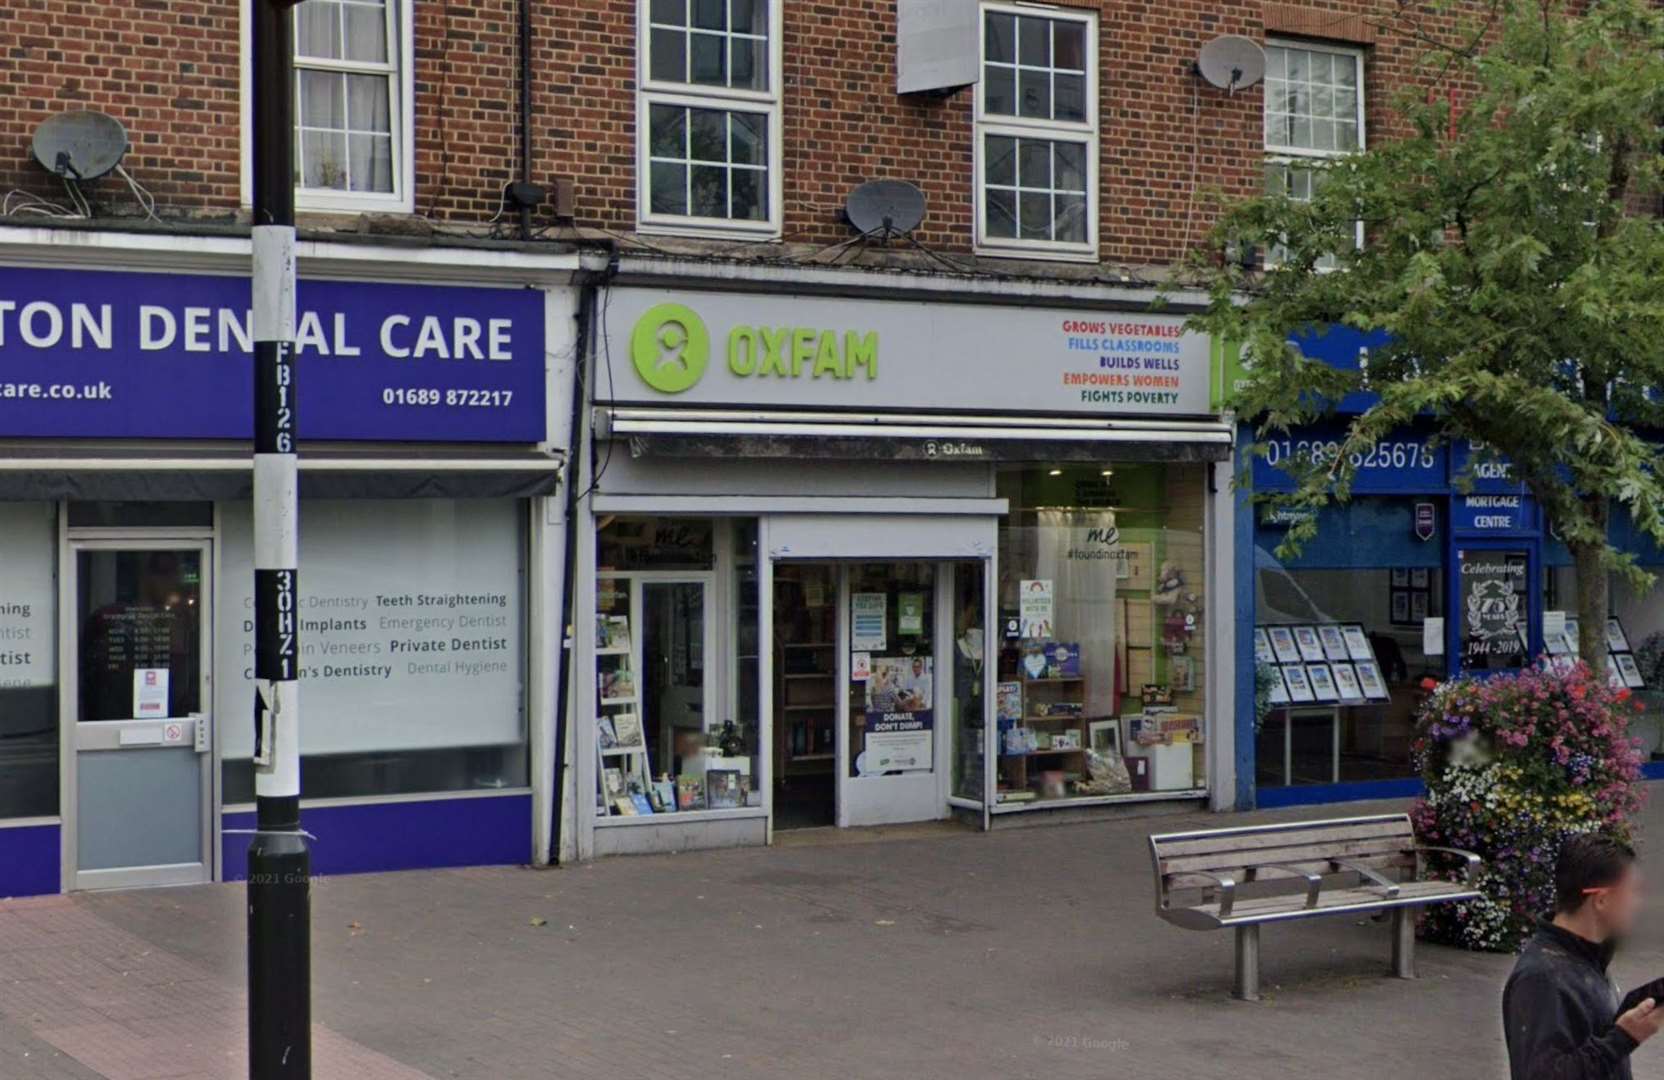 The early 19th century 15 pence piece was donated to Oxfam in Orpington. Picture: Google Maps